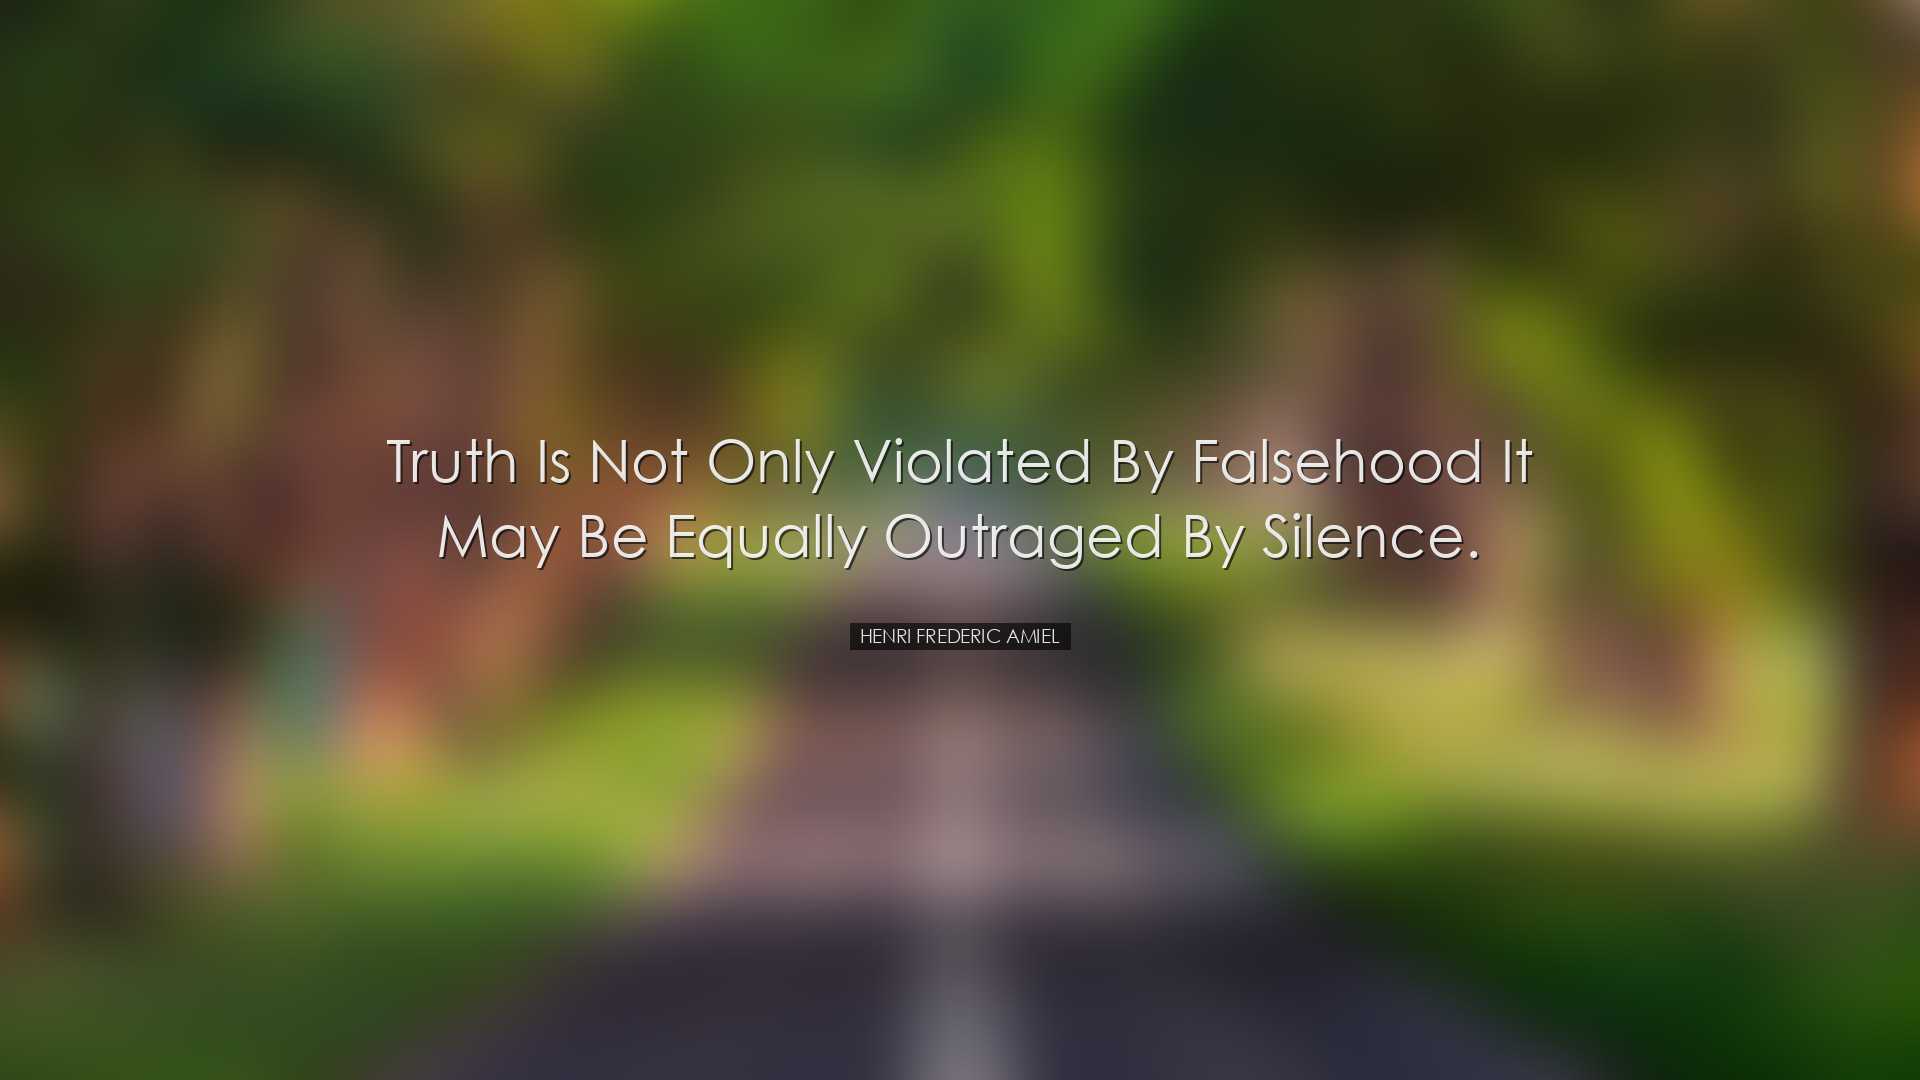 Truth is not only violated by falsehood it may be equally outraged